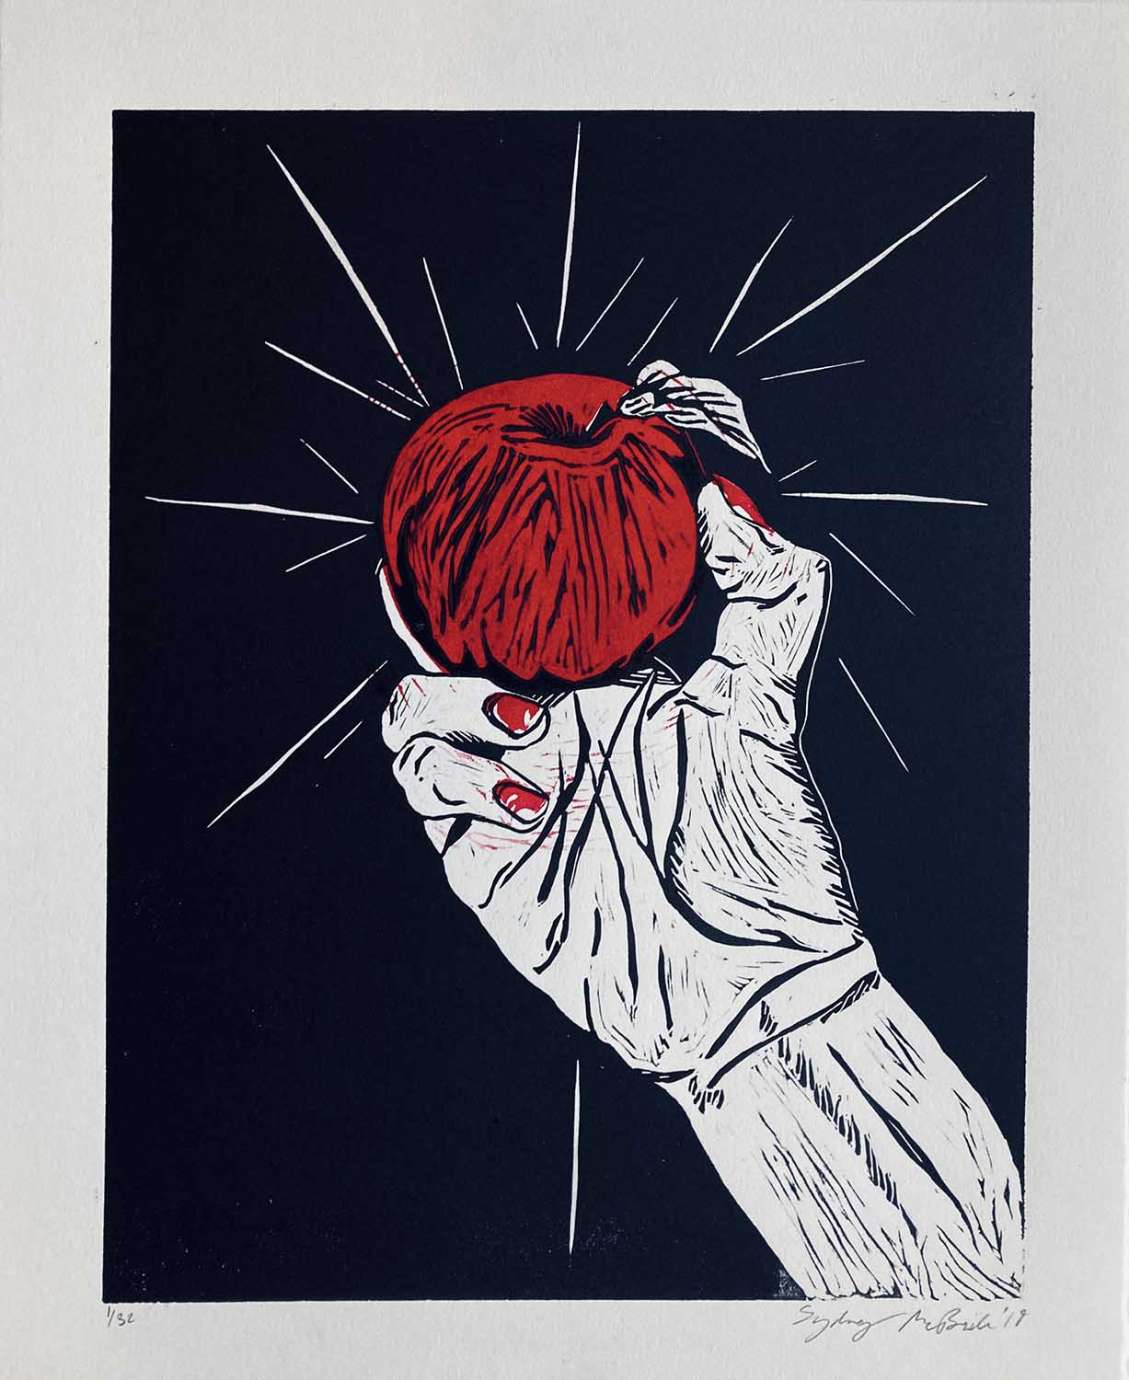 Print by Sydney McBride of a hand holding a red apple in front of a black background